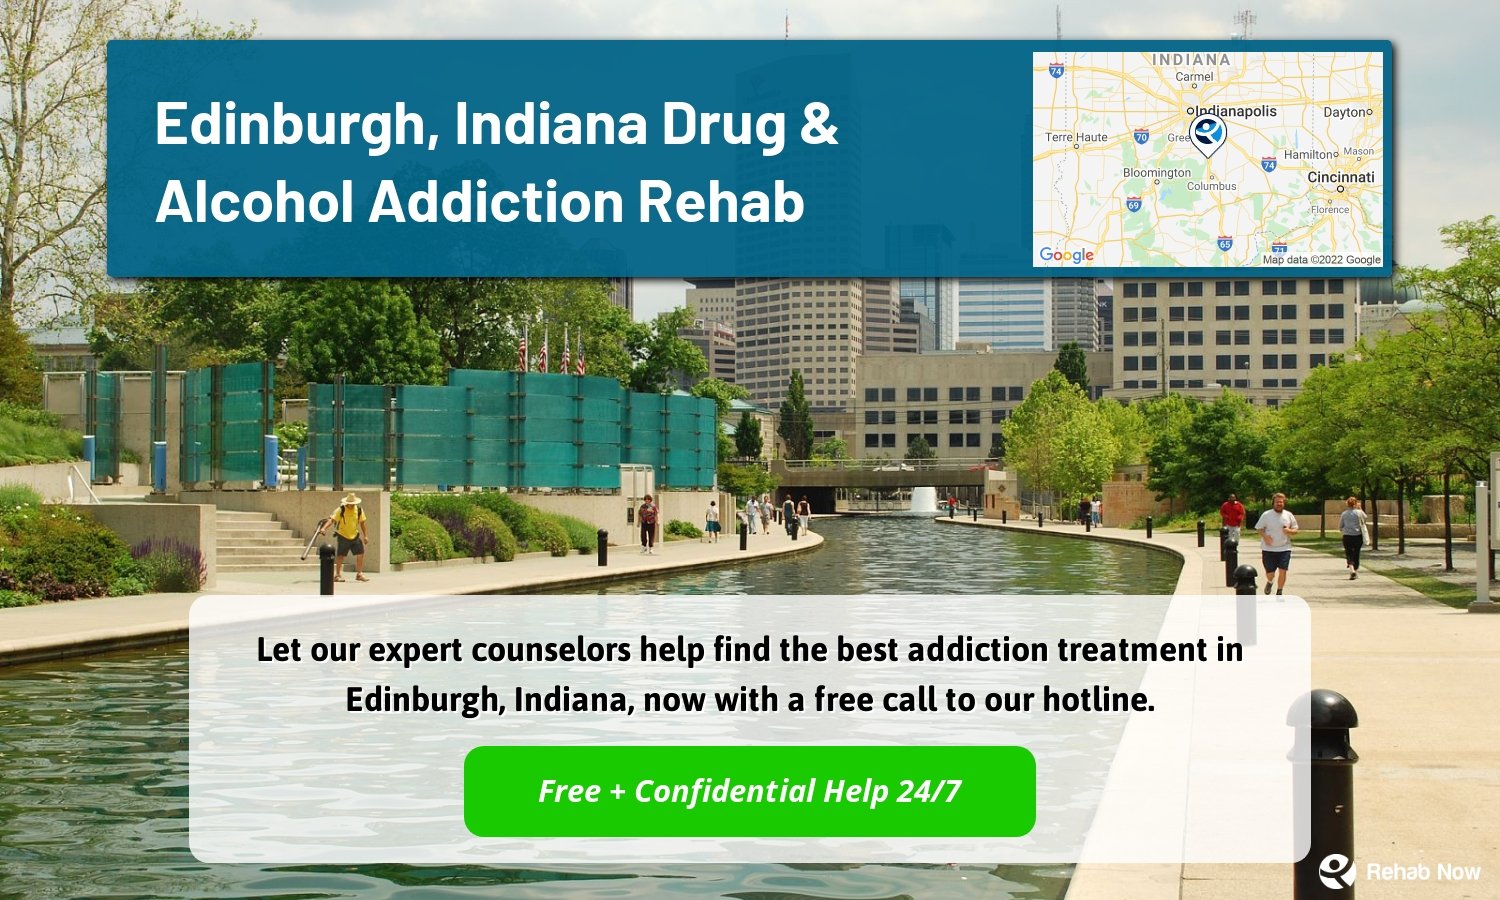 Let our expert counselors help find the best addiction treatment in Edinburgh, Indiana, now with a free call to our hotline.